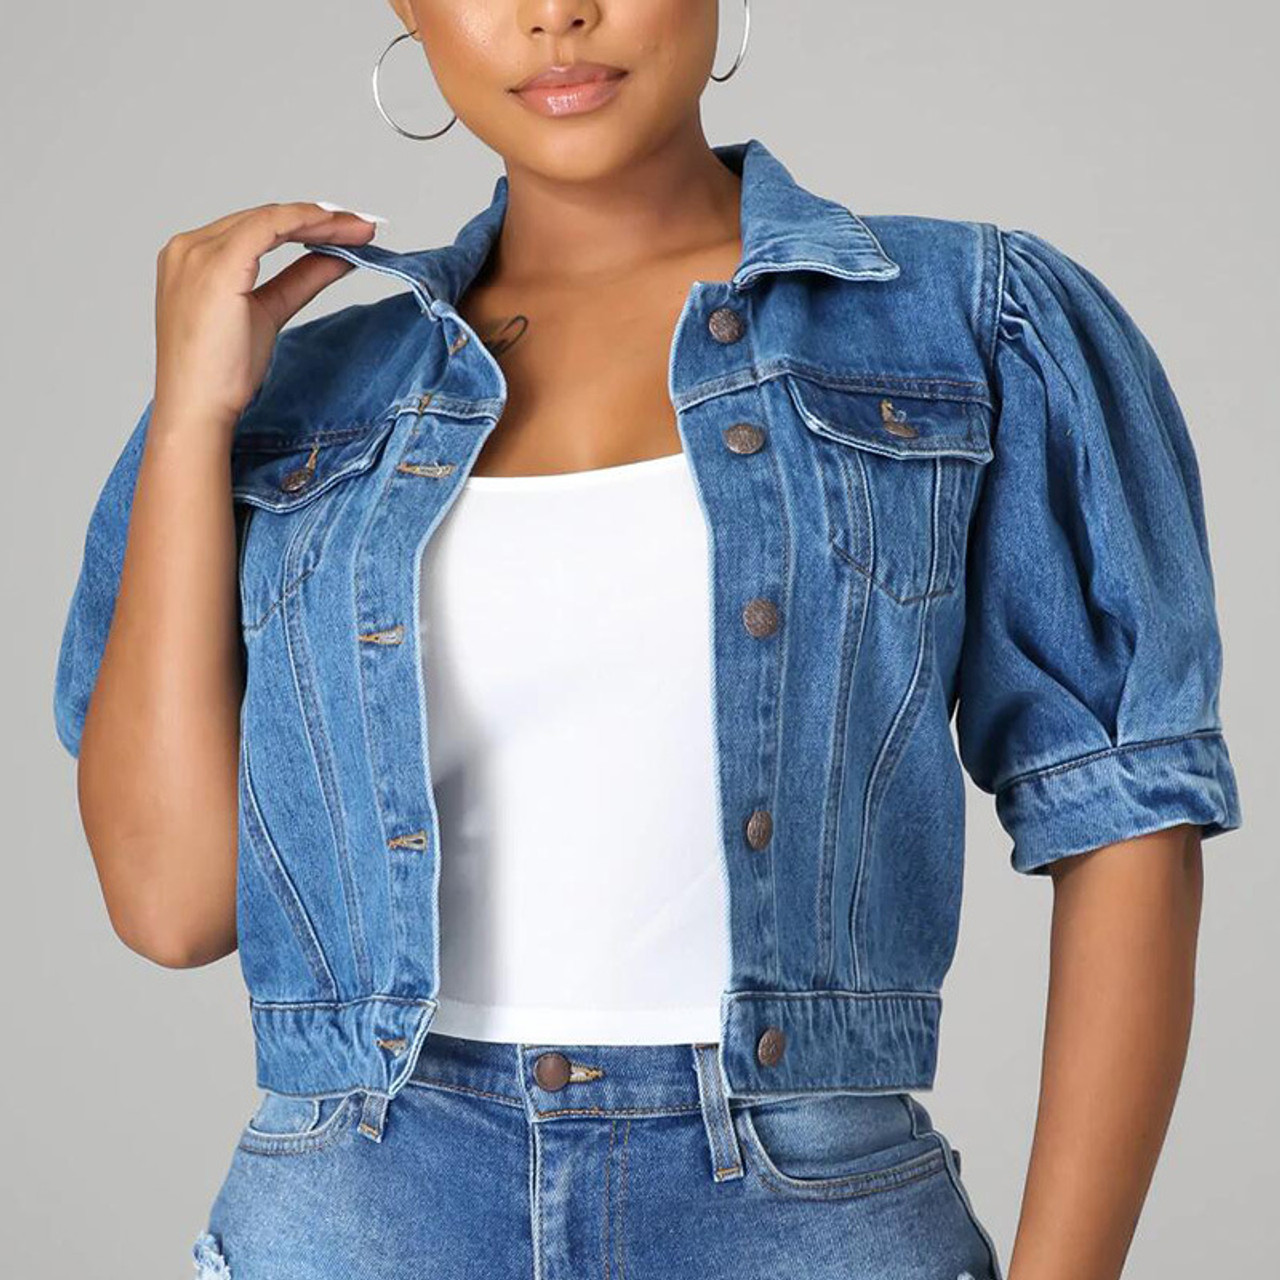 Dropship Sky Blue Half Sleeves Peplum Denim Jacket to Sell Online at a  Lower Price | Doba